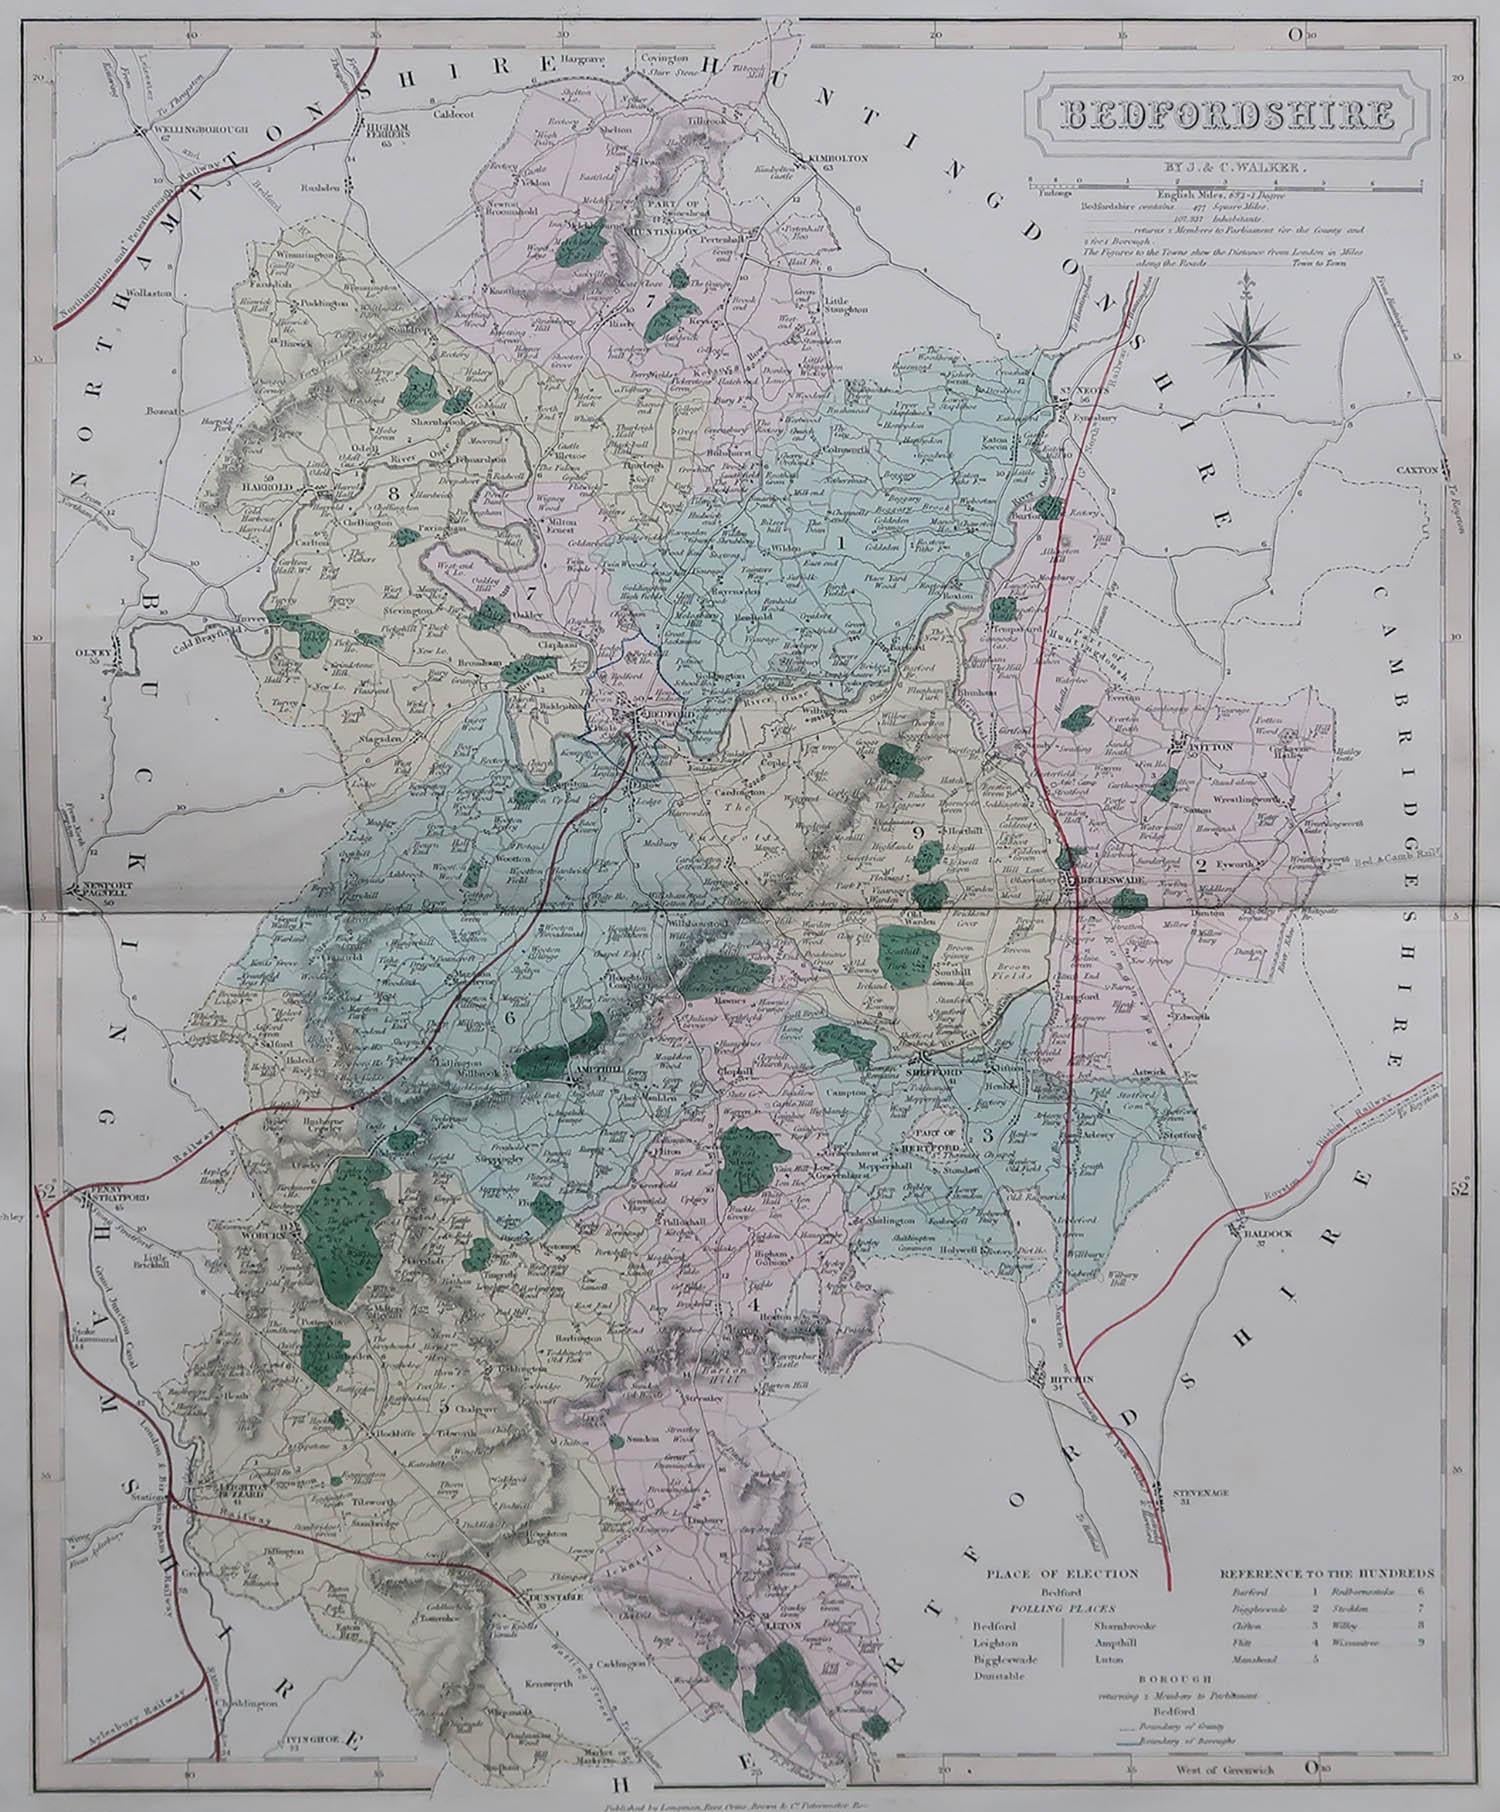 Great map of Bedfordshire

Original colour

By J & C Walker

Published by Longman, Rees, Orme, Brown & Co. 1851

Unframed.




